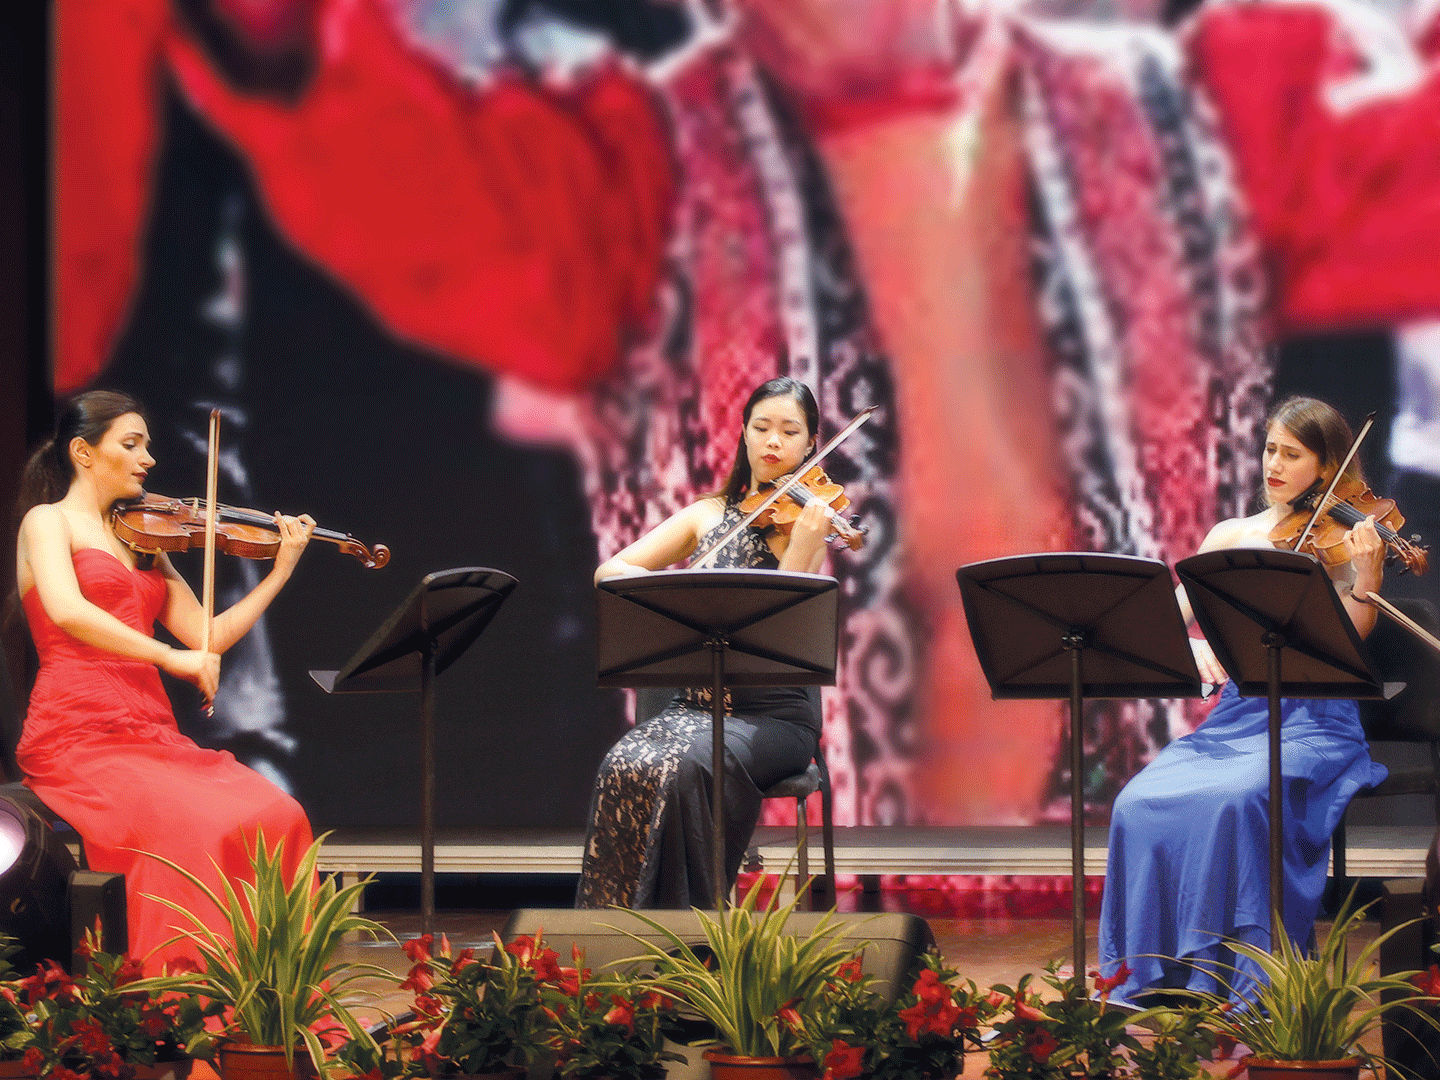 Astrid Poghosyan, female violinist performs along with two other violinists in a theater in Shangai